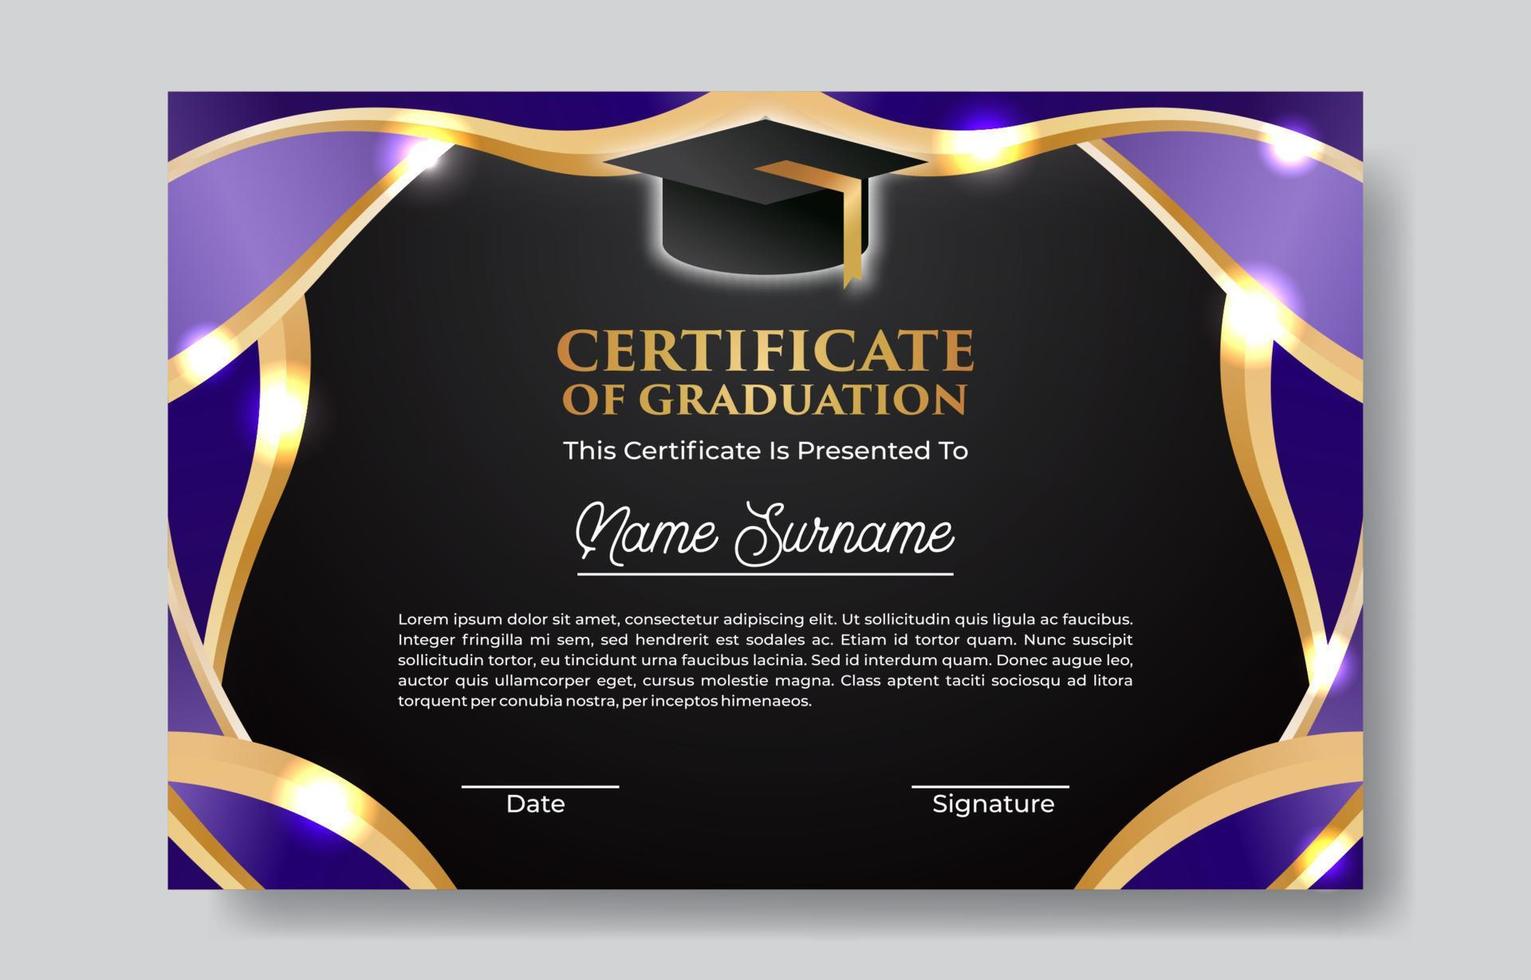 Certificate of Graduation Template with Toga Hat vector